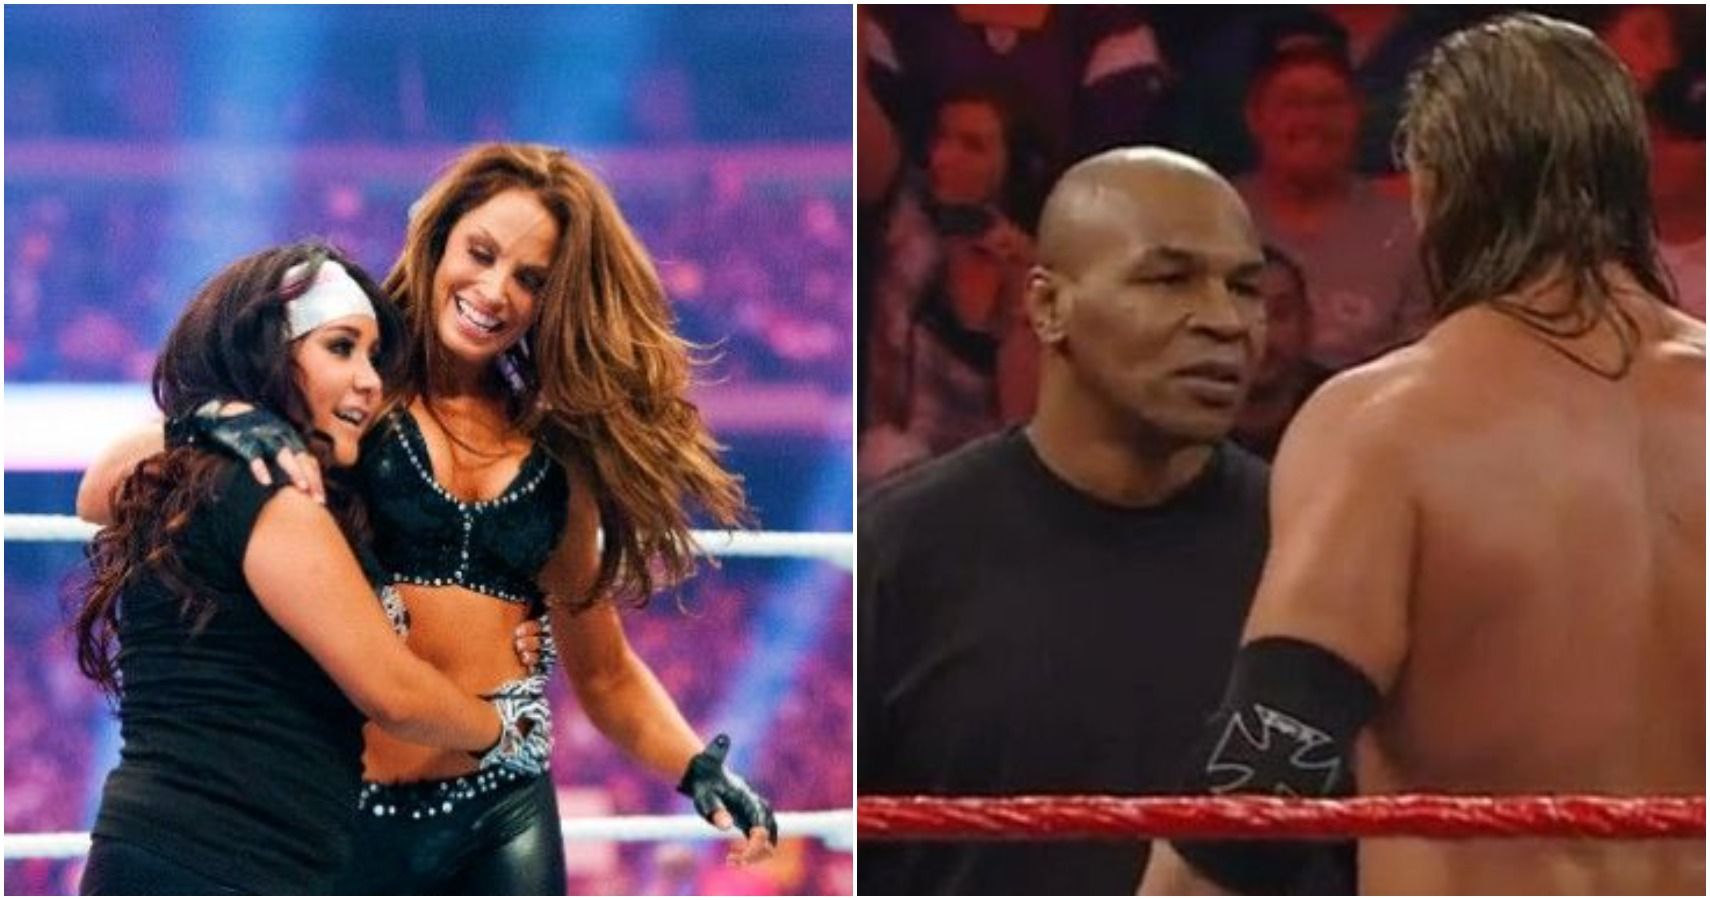 Snooki and Trish Stratus and Mike Tyson and Triple H